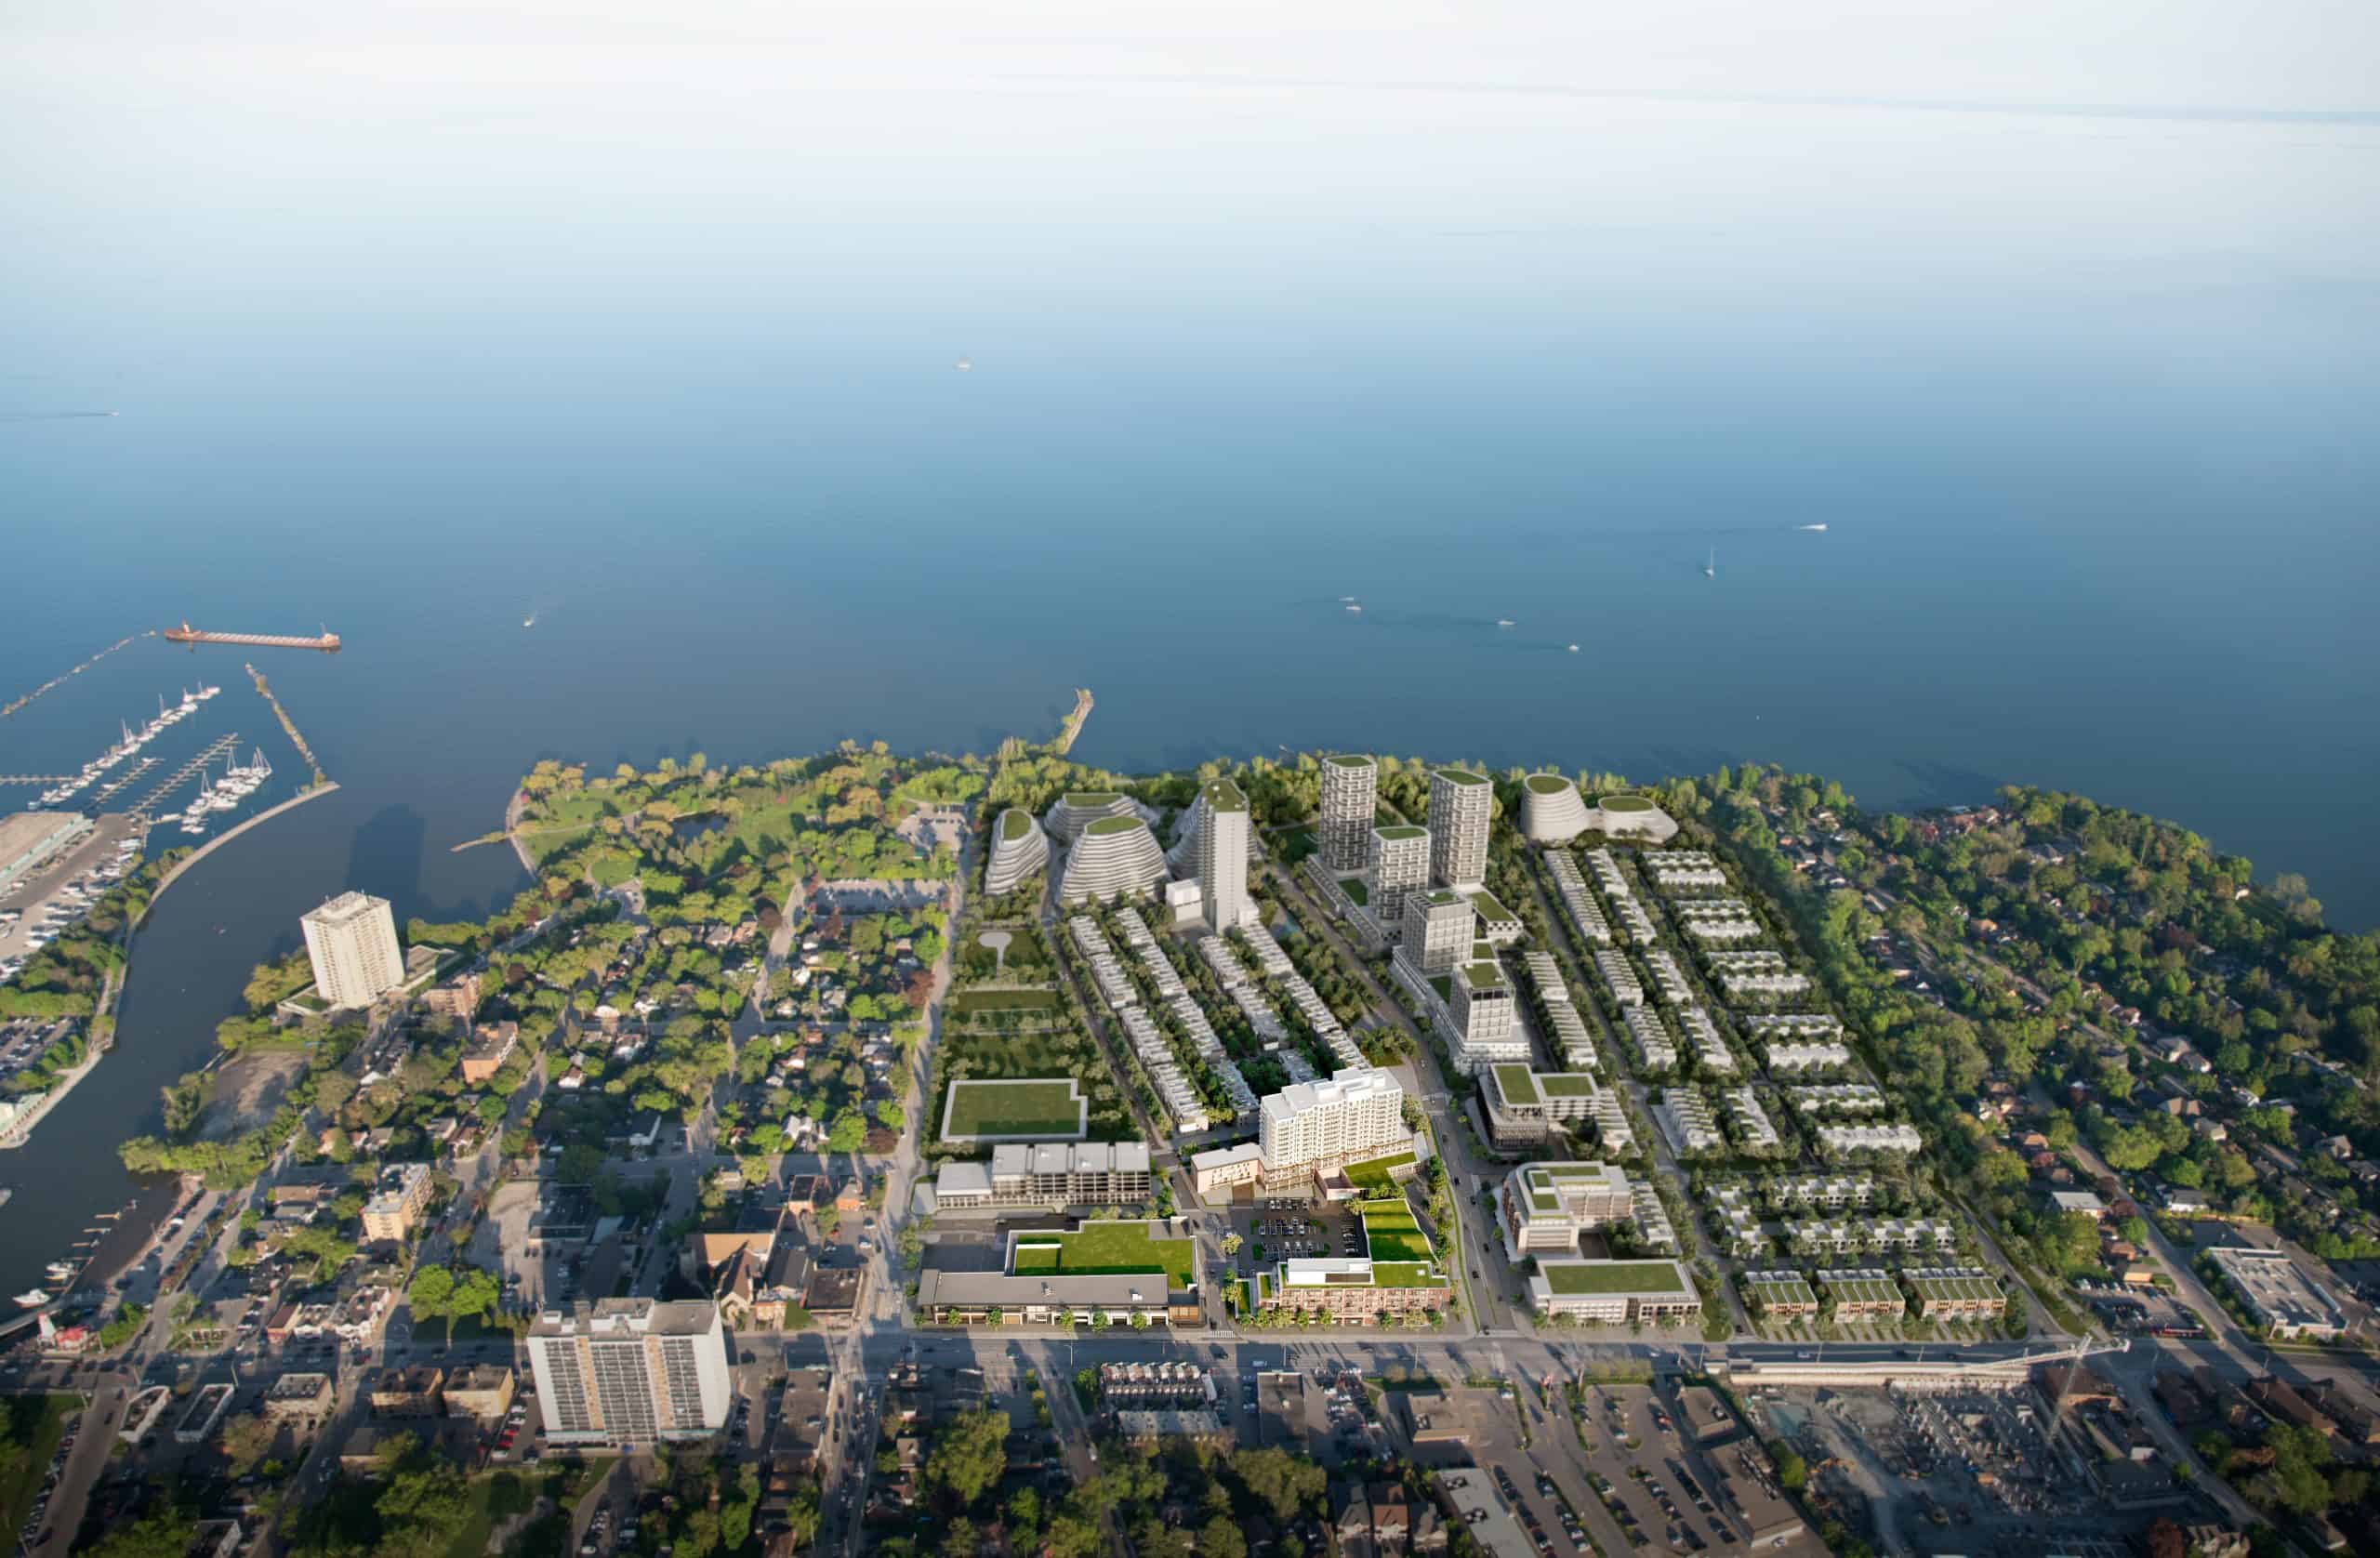 Sustainable new community is making Mississauga’s waterfront more connected and accessible